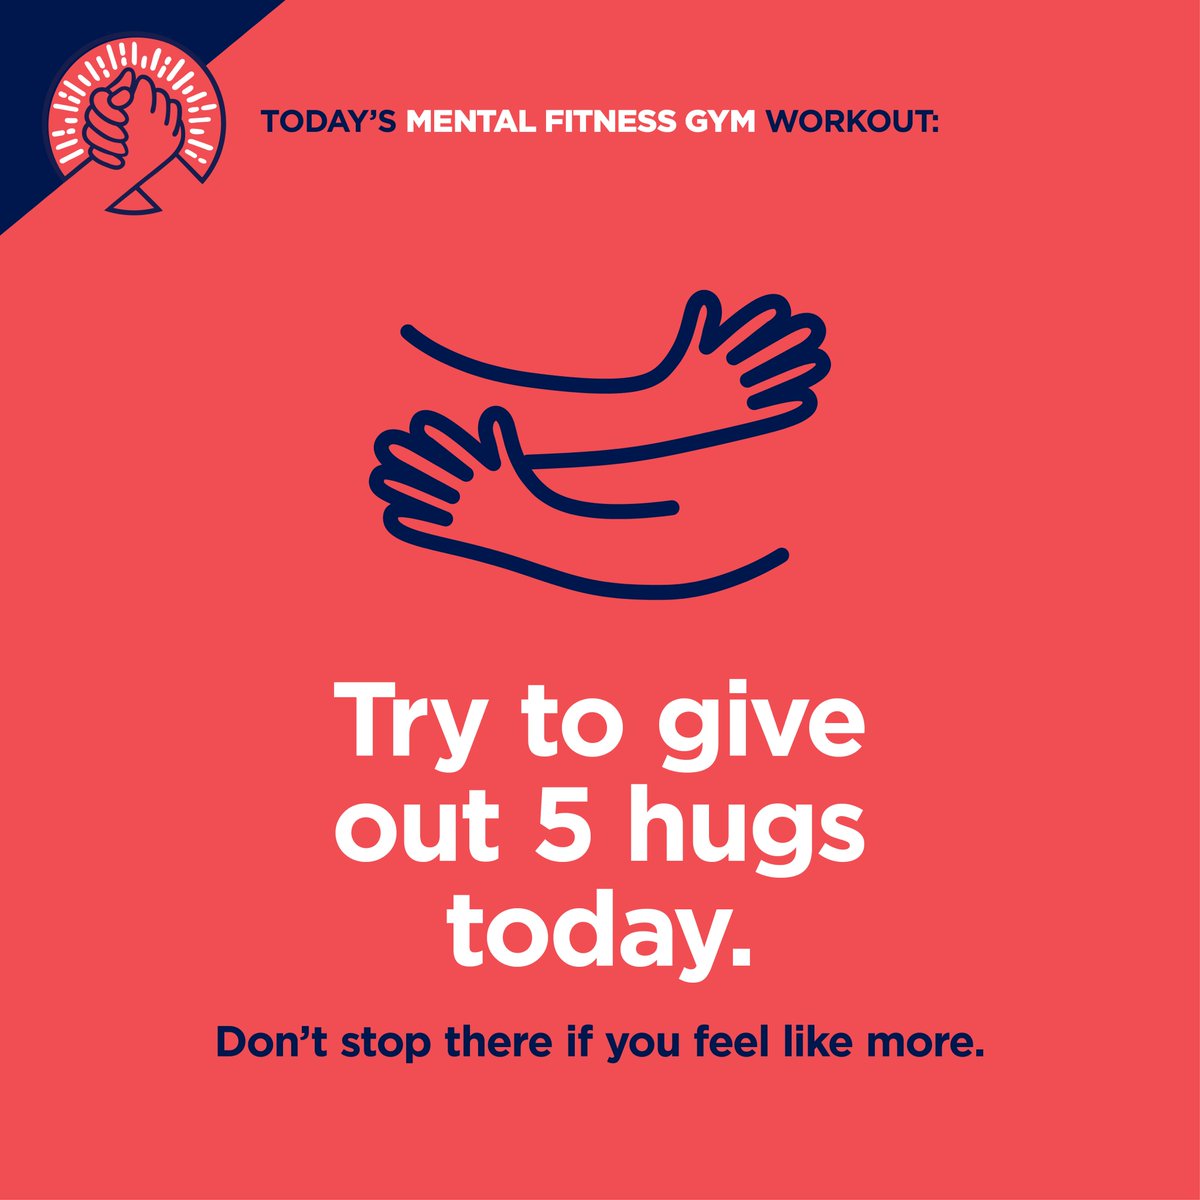 You’ll need a buddy (or five) for today’s #mentalfitness exercise. Whatever way you like to hug, it’s easy to do and scientifically proven to improve happiness. Give it a go and think about how you feel at the end of the day. Discover more at: thementalfitnessgym.org